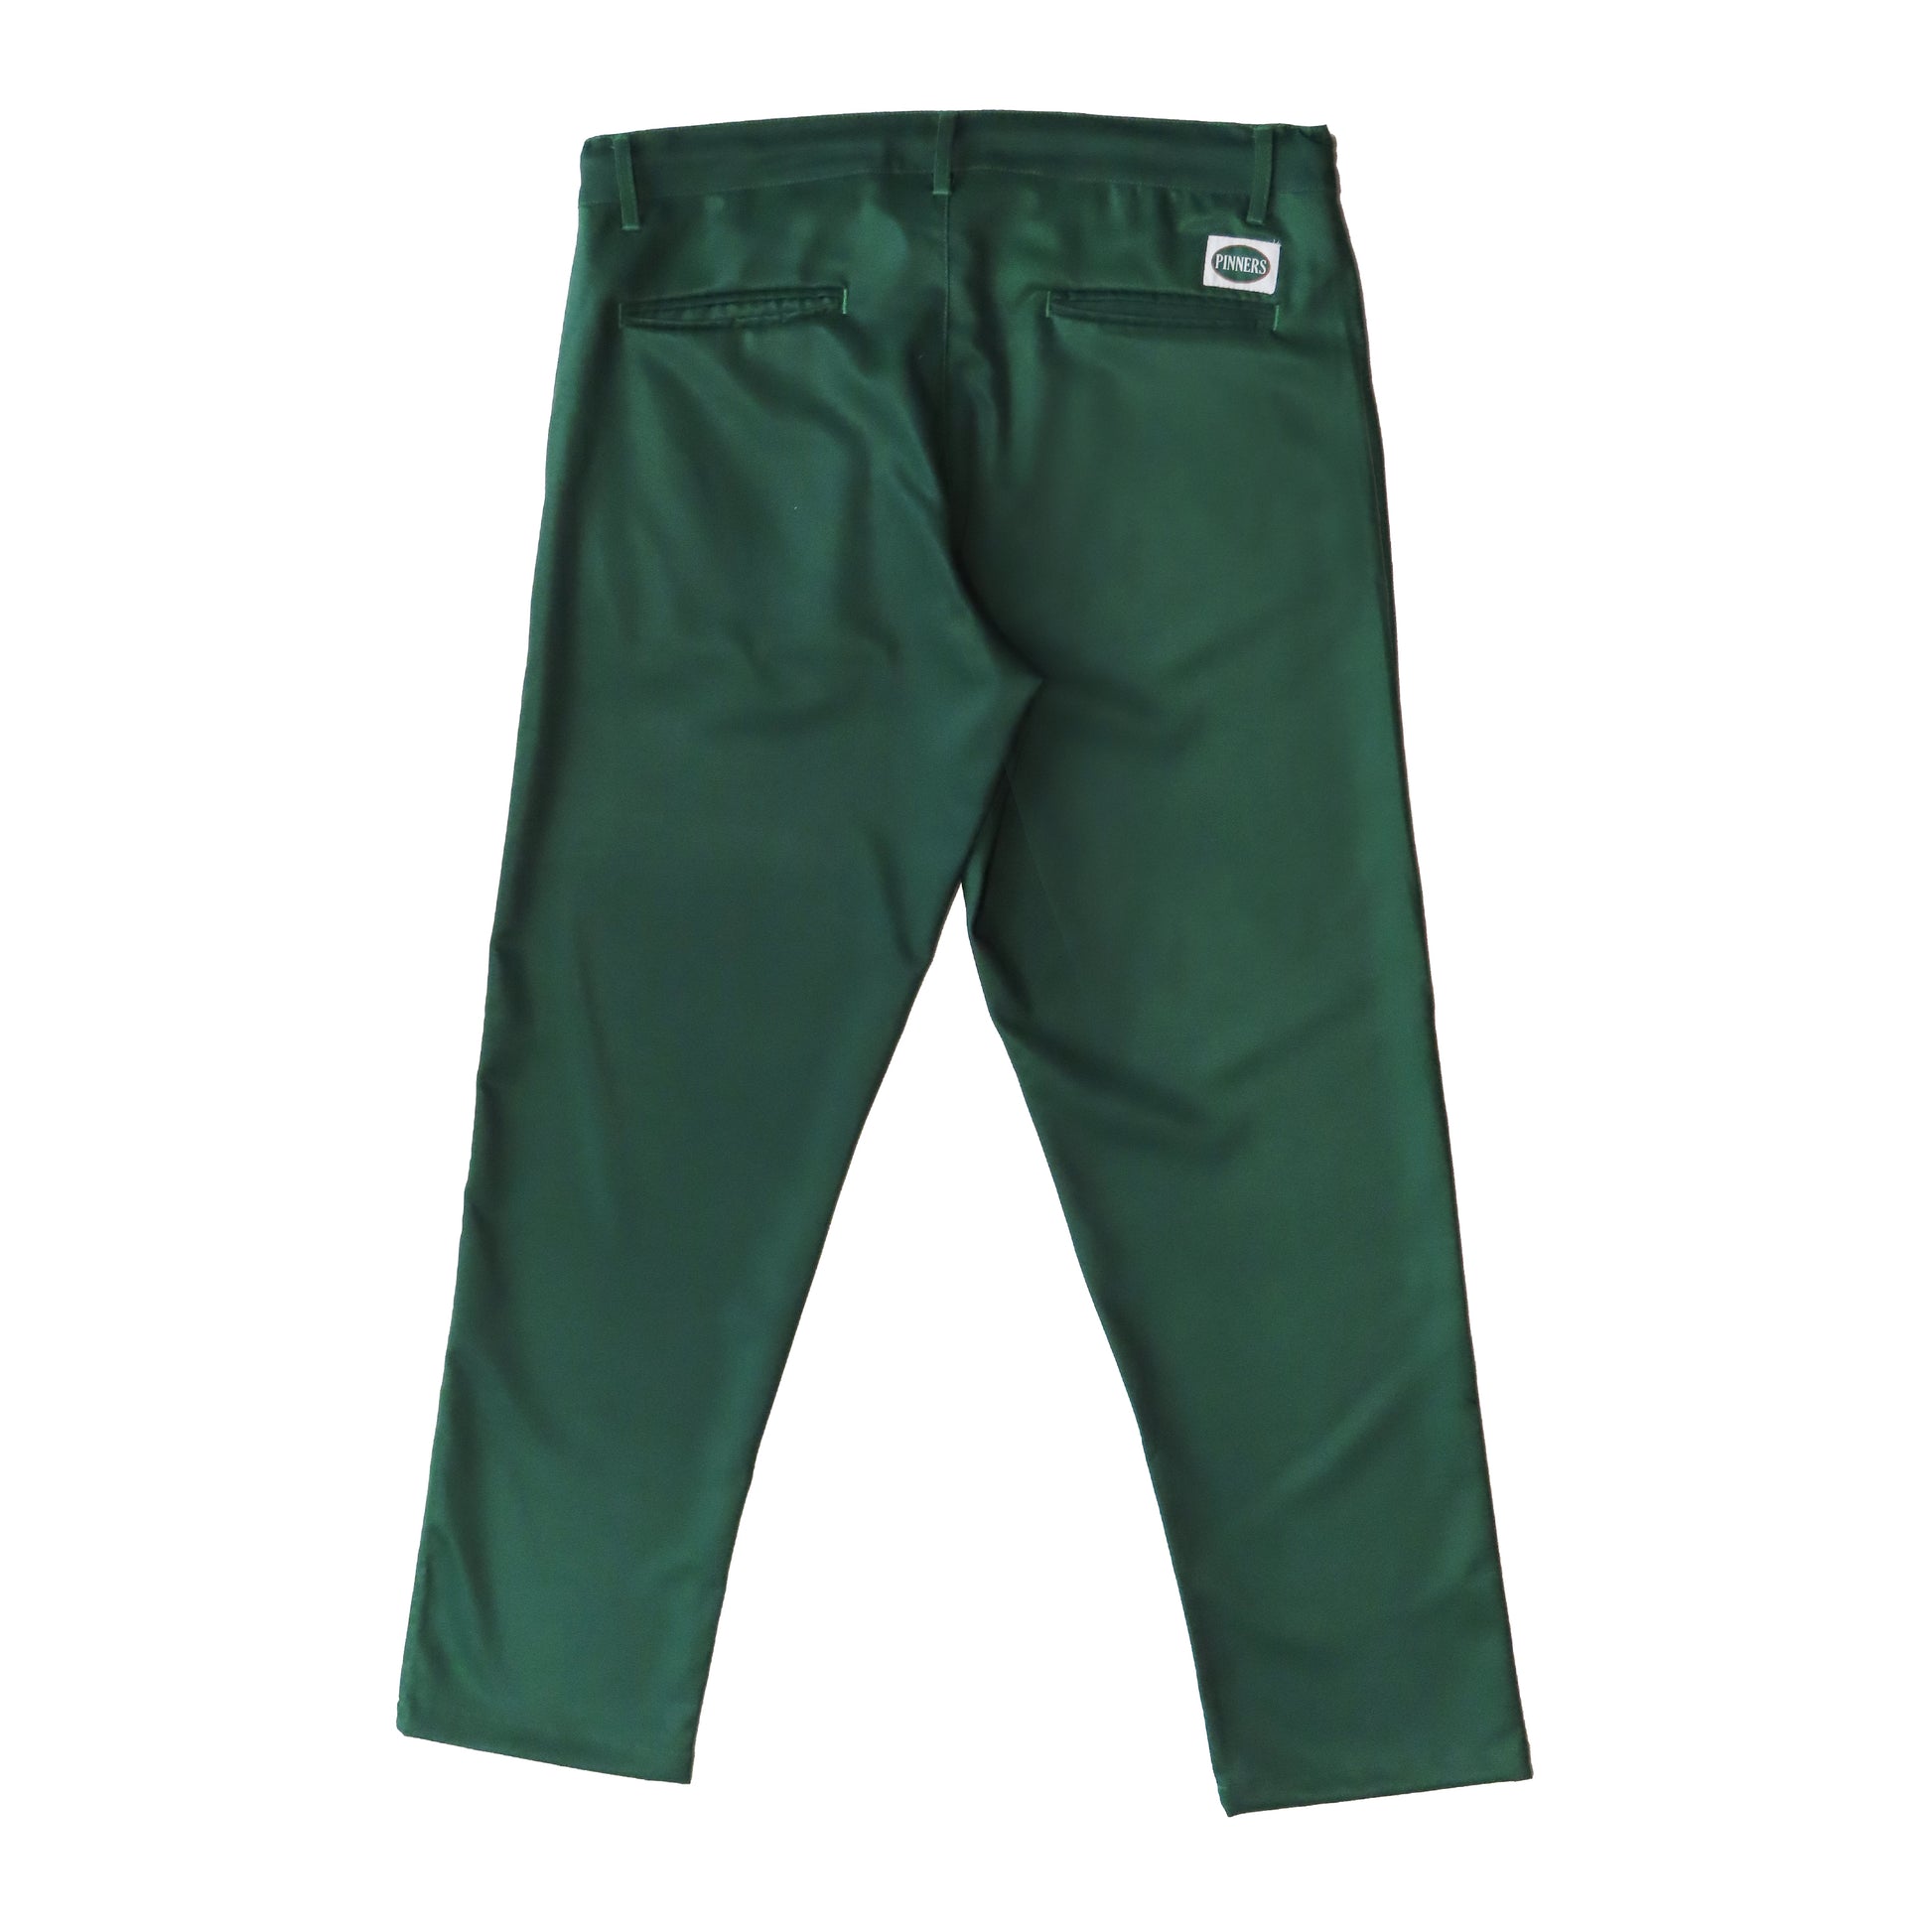 Green Golf Pants With Free Multitool & Delivery